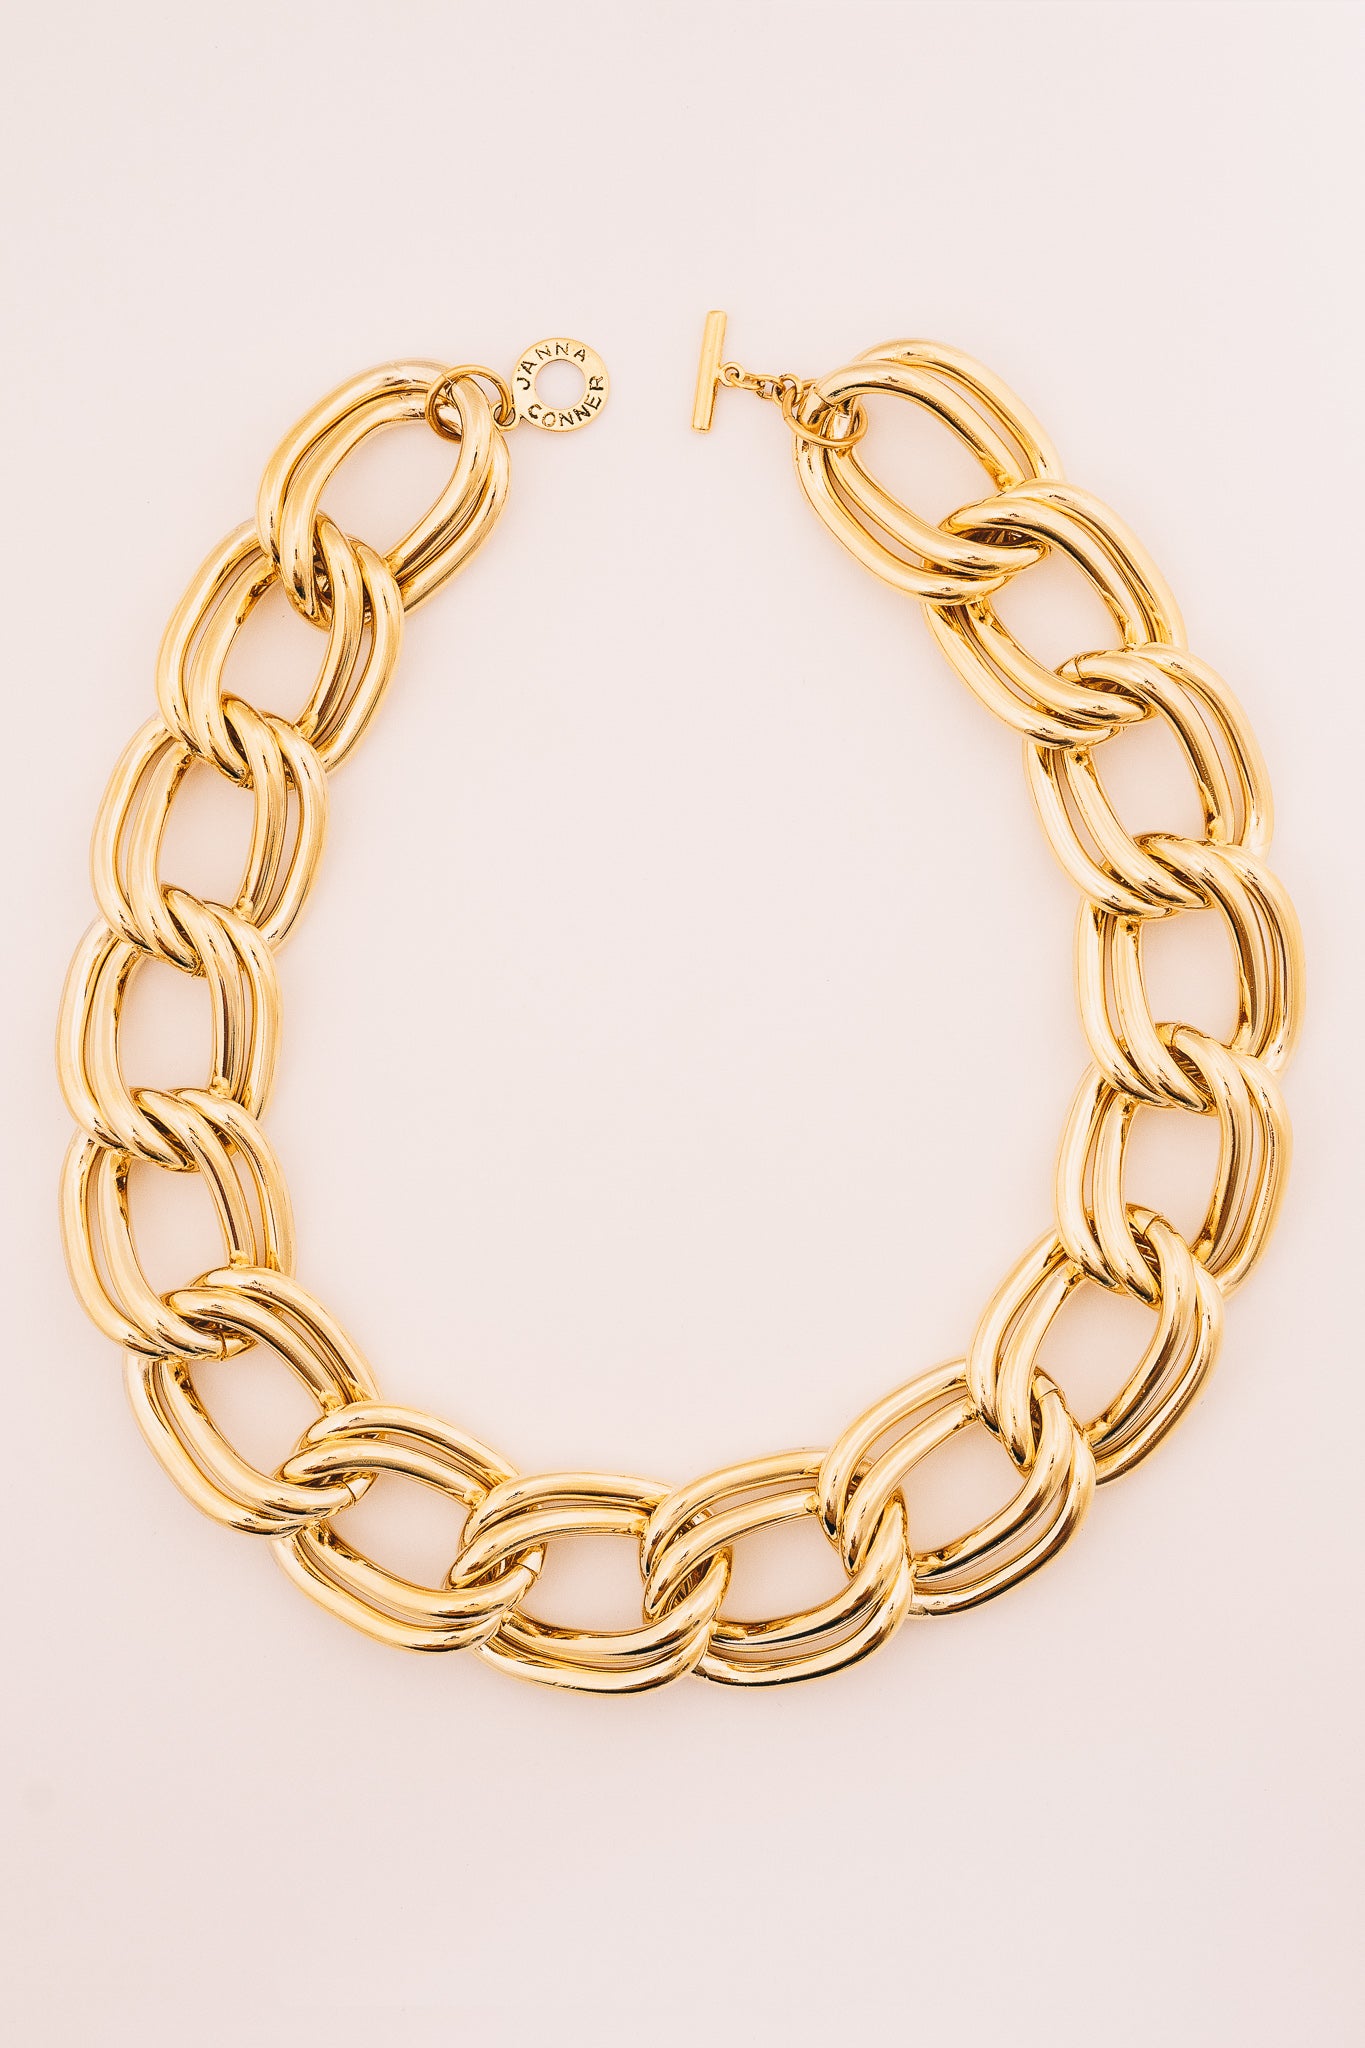 US$ 58.00 - 4 Feet Supper Large Chunky Resin Gold Chain Links, Plastic  Chain Links, Necklace Chain Links, Open Link ,Size 15mmx25mm -  m.